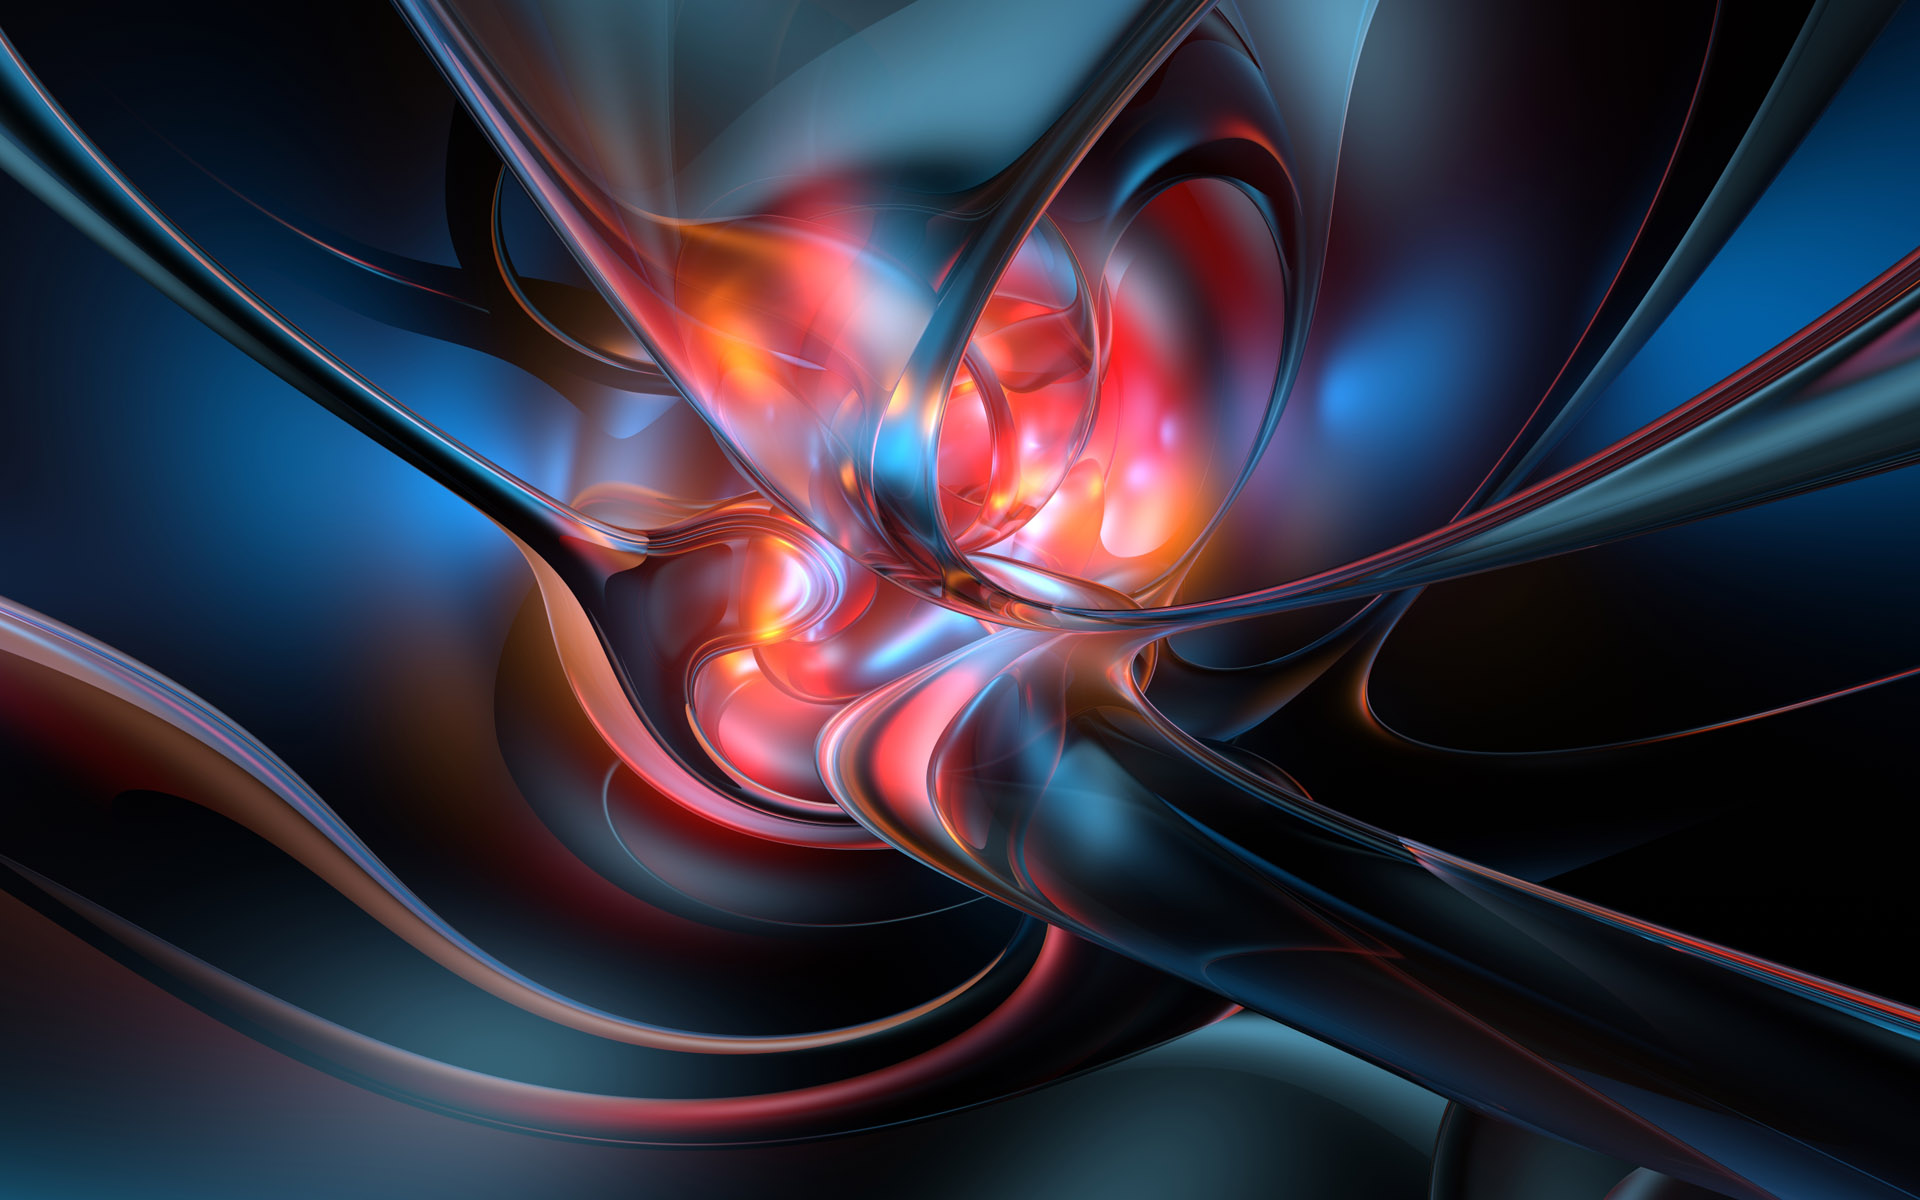 Abstracts 3d Mobile Laptop Wallpapers Free Download